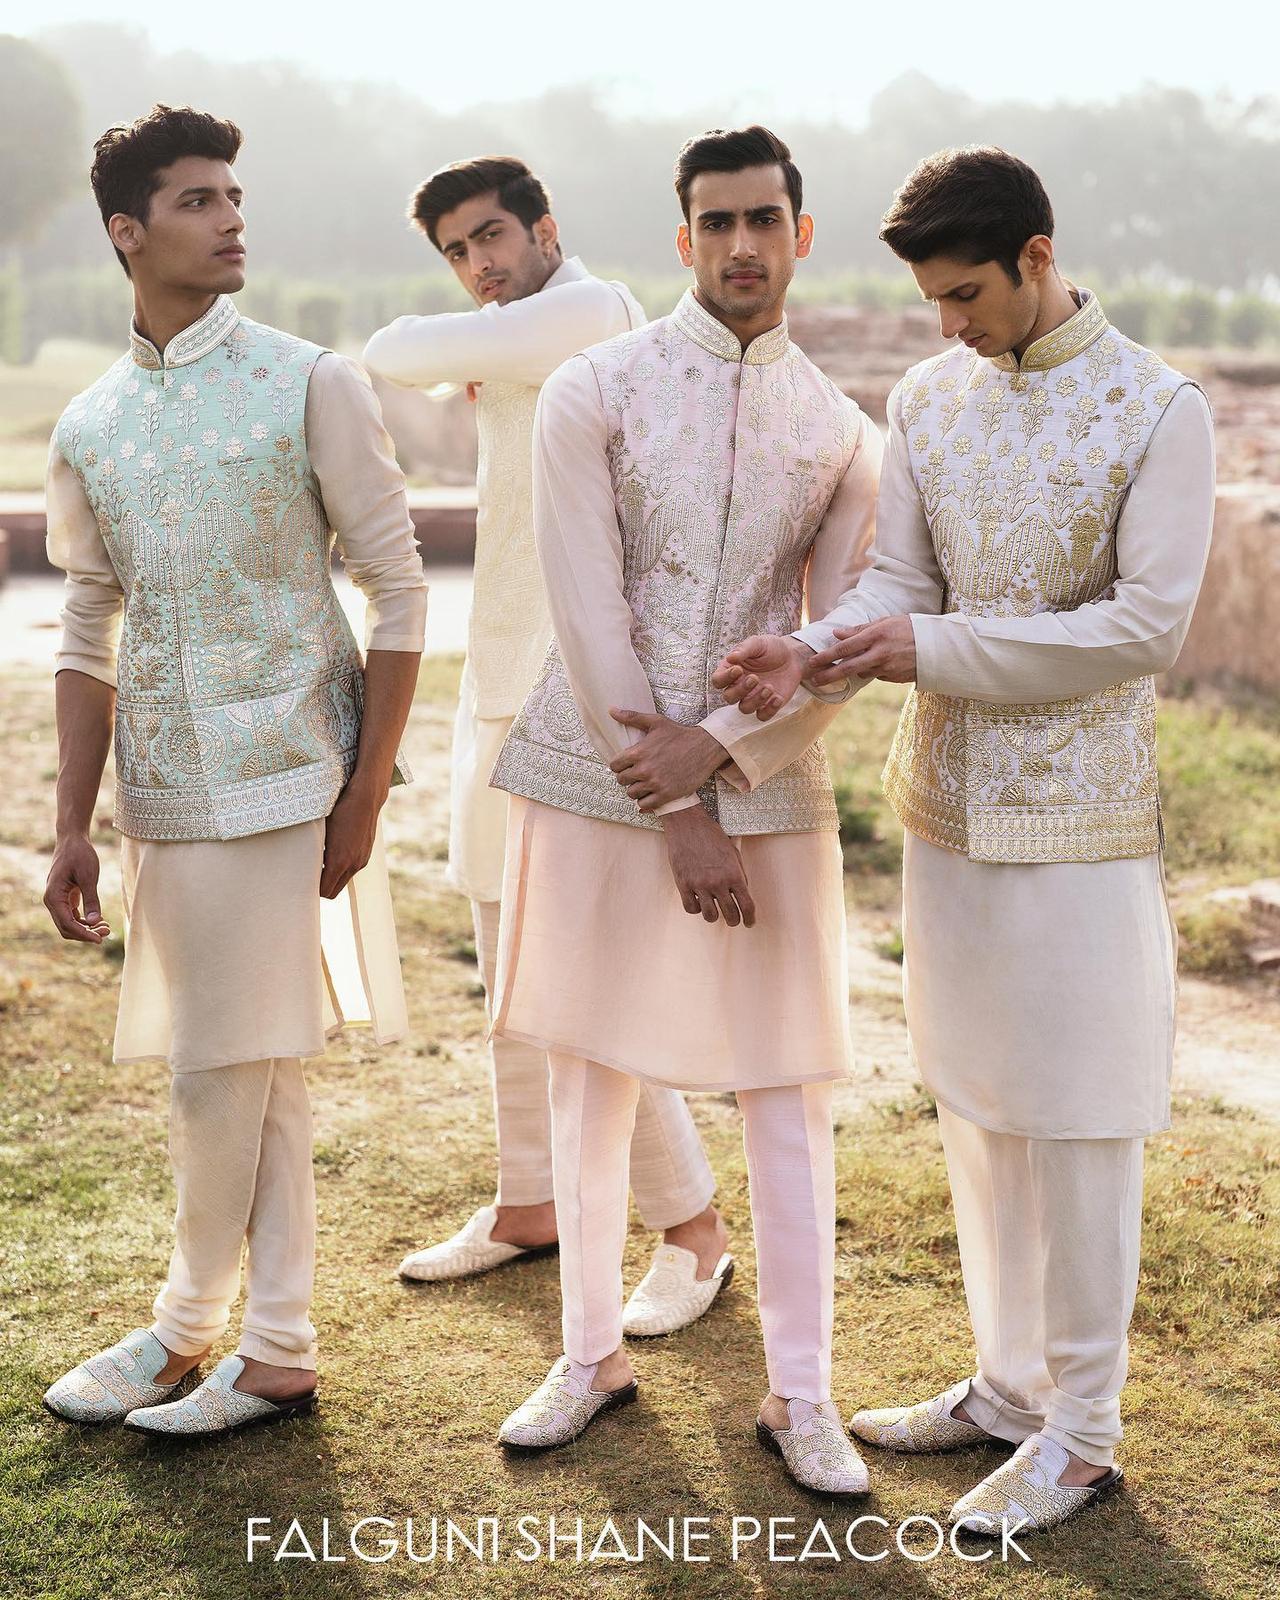 14 Beautiful Indian Dresses Options For The Bride And Groom!